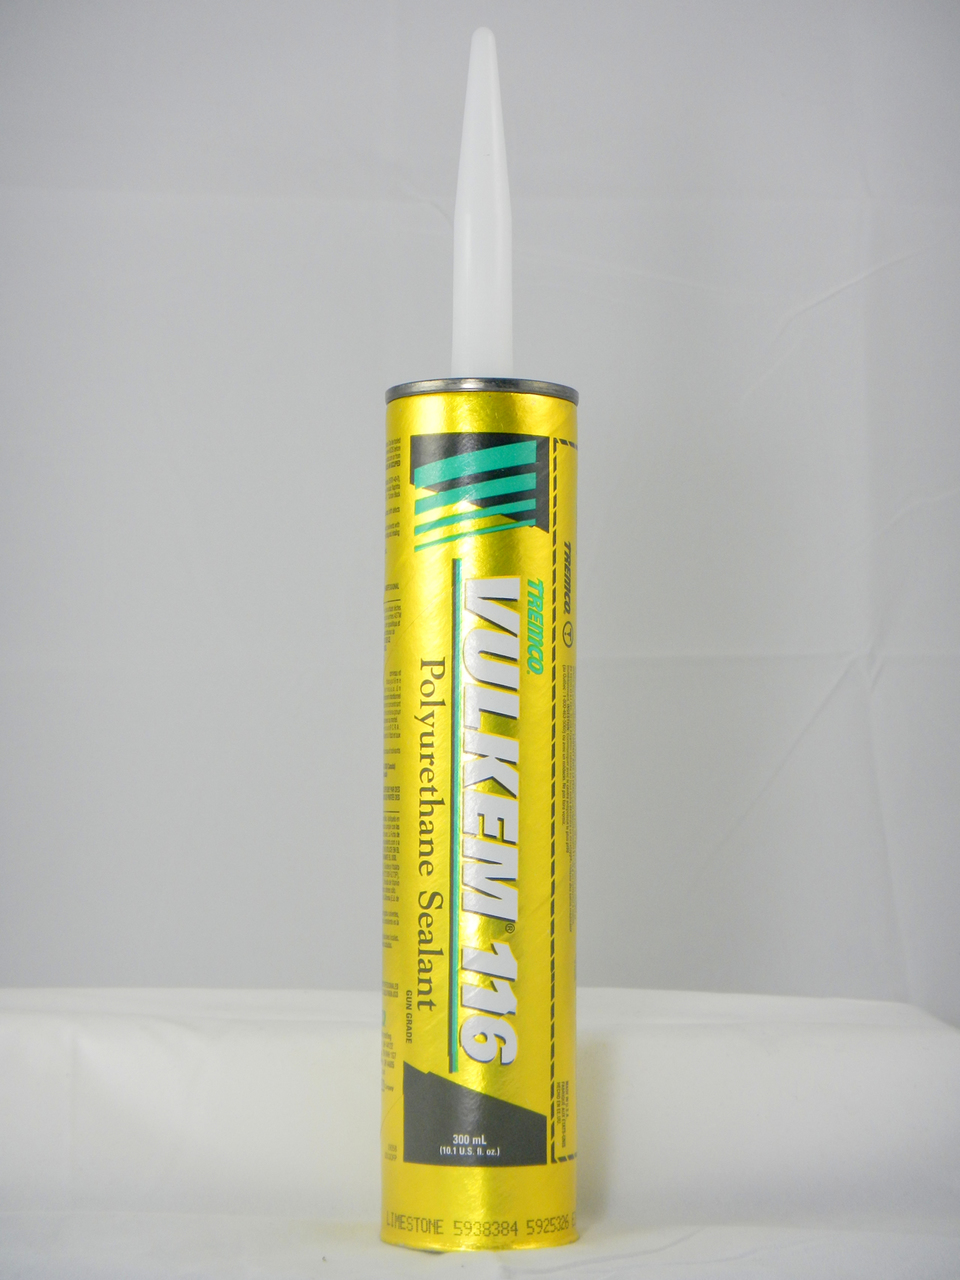 Vulkem 116 for Crack and Expansion Repair Caulk Questions & Answers